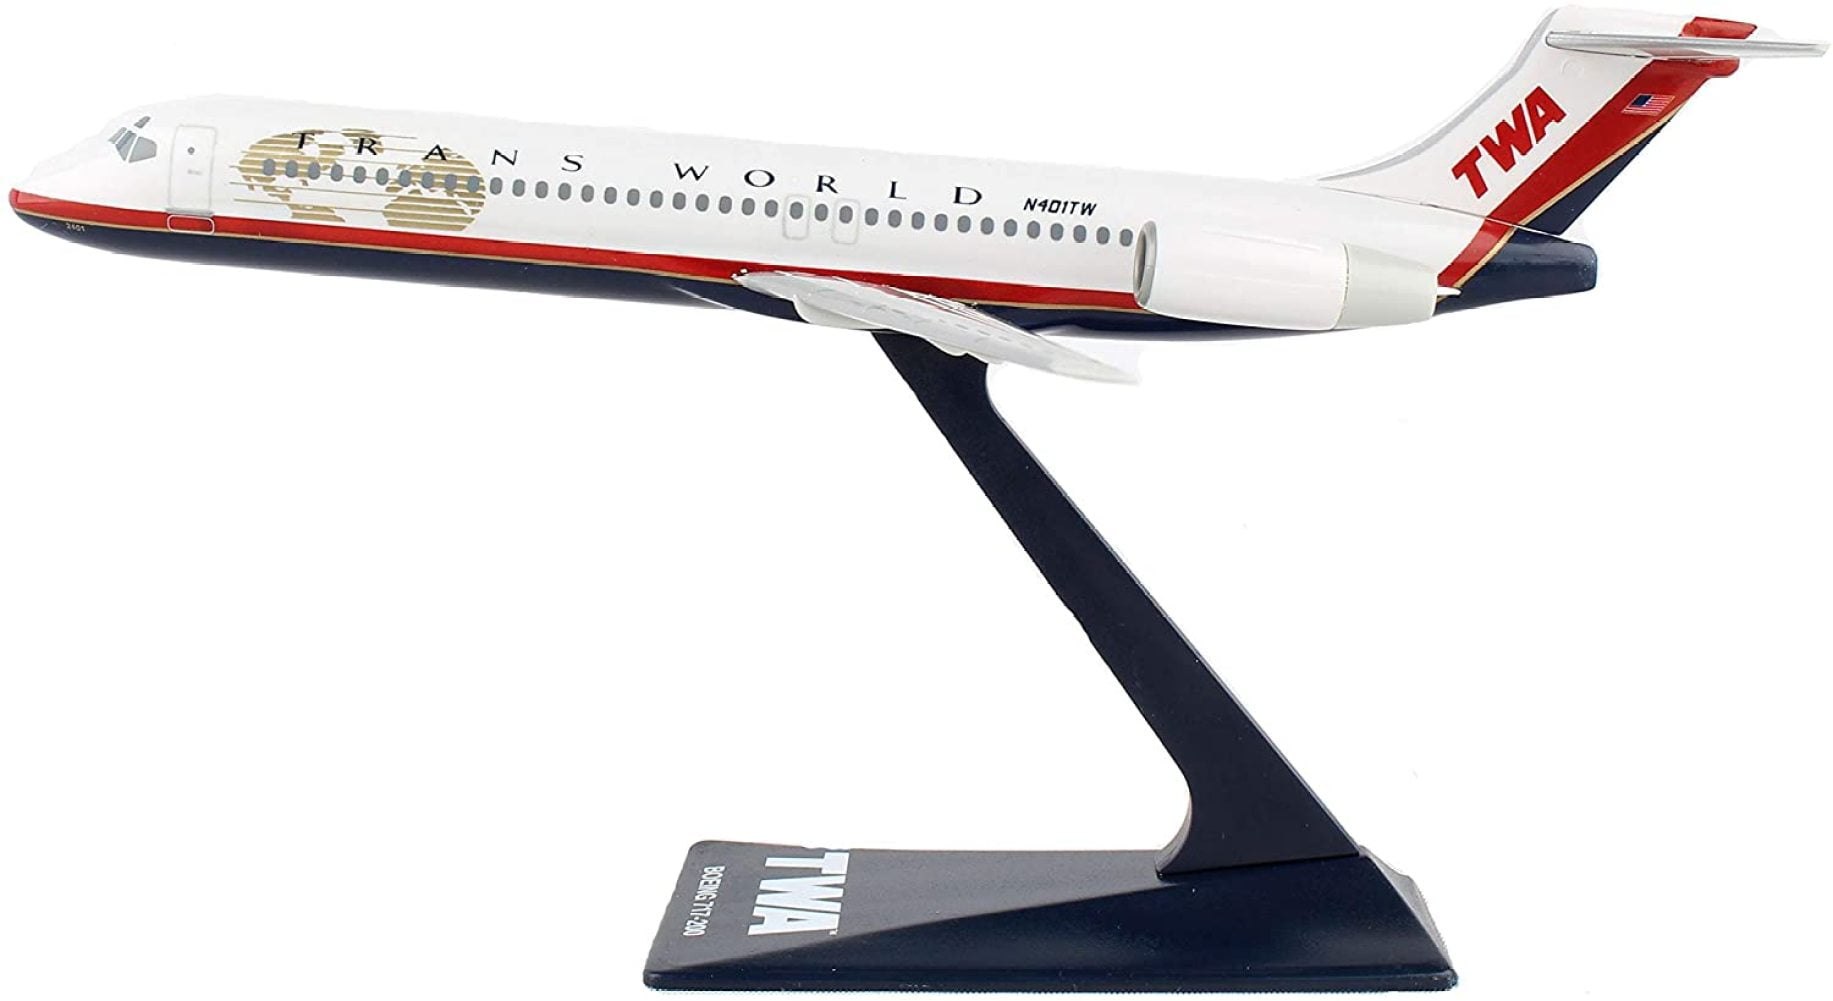 Flight Miniatures USAir Airways 1989 Douglas DC-9 1:200 Scale Display Model with Stand 